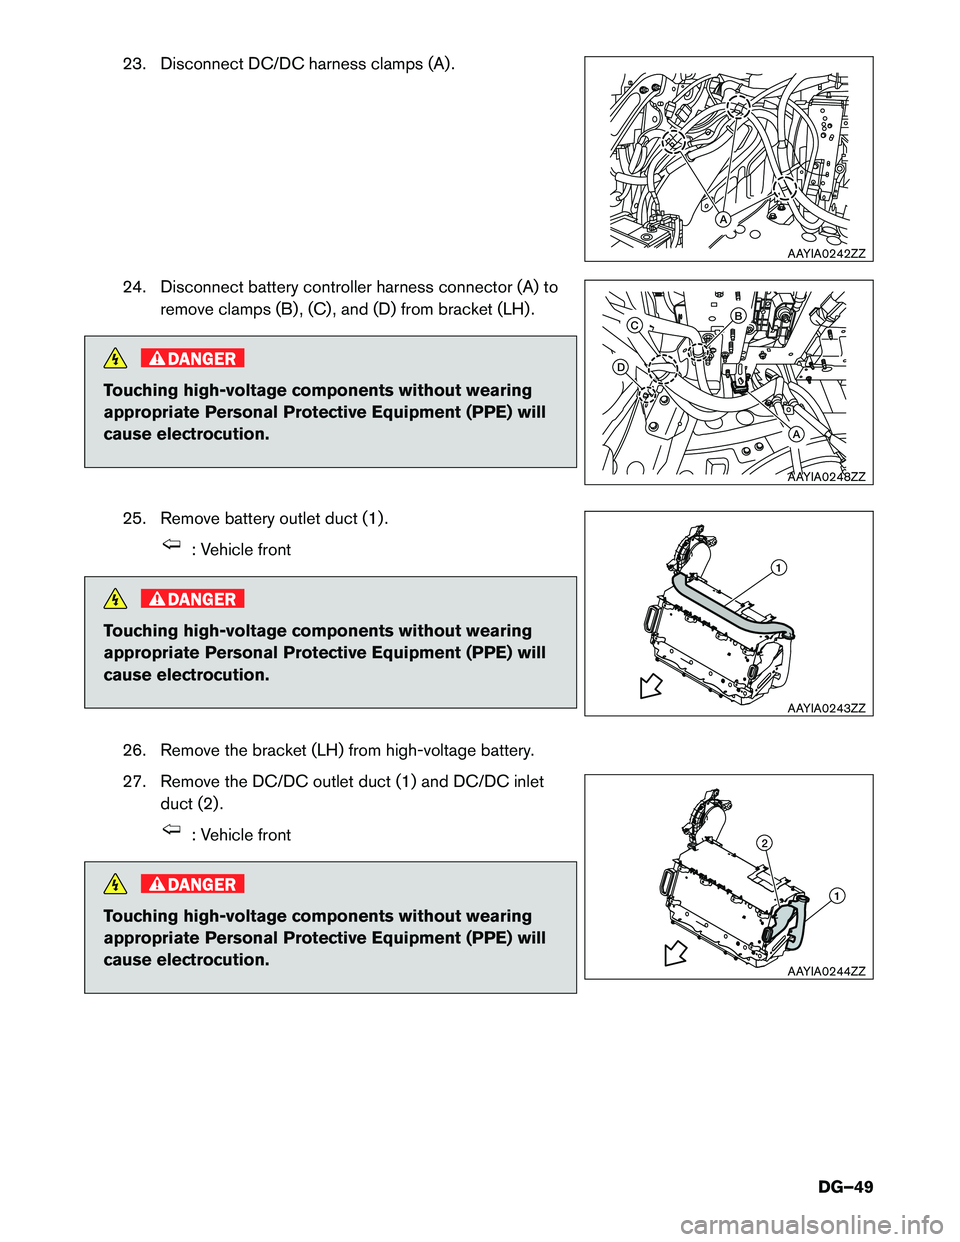 INFINITI Q50 HYBRID 2016  Dismantling Guide 23. Disconnect DC/DC harness clamps (A) .
24.
Disconnect battery controller harness connector (A) to
remove clamps (B) , (C) , and (D) from bracket (LH) . DANGER
Touching high-voltage components witho